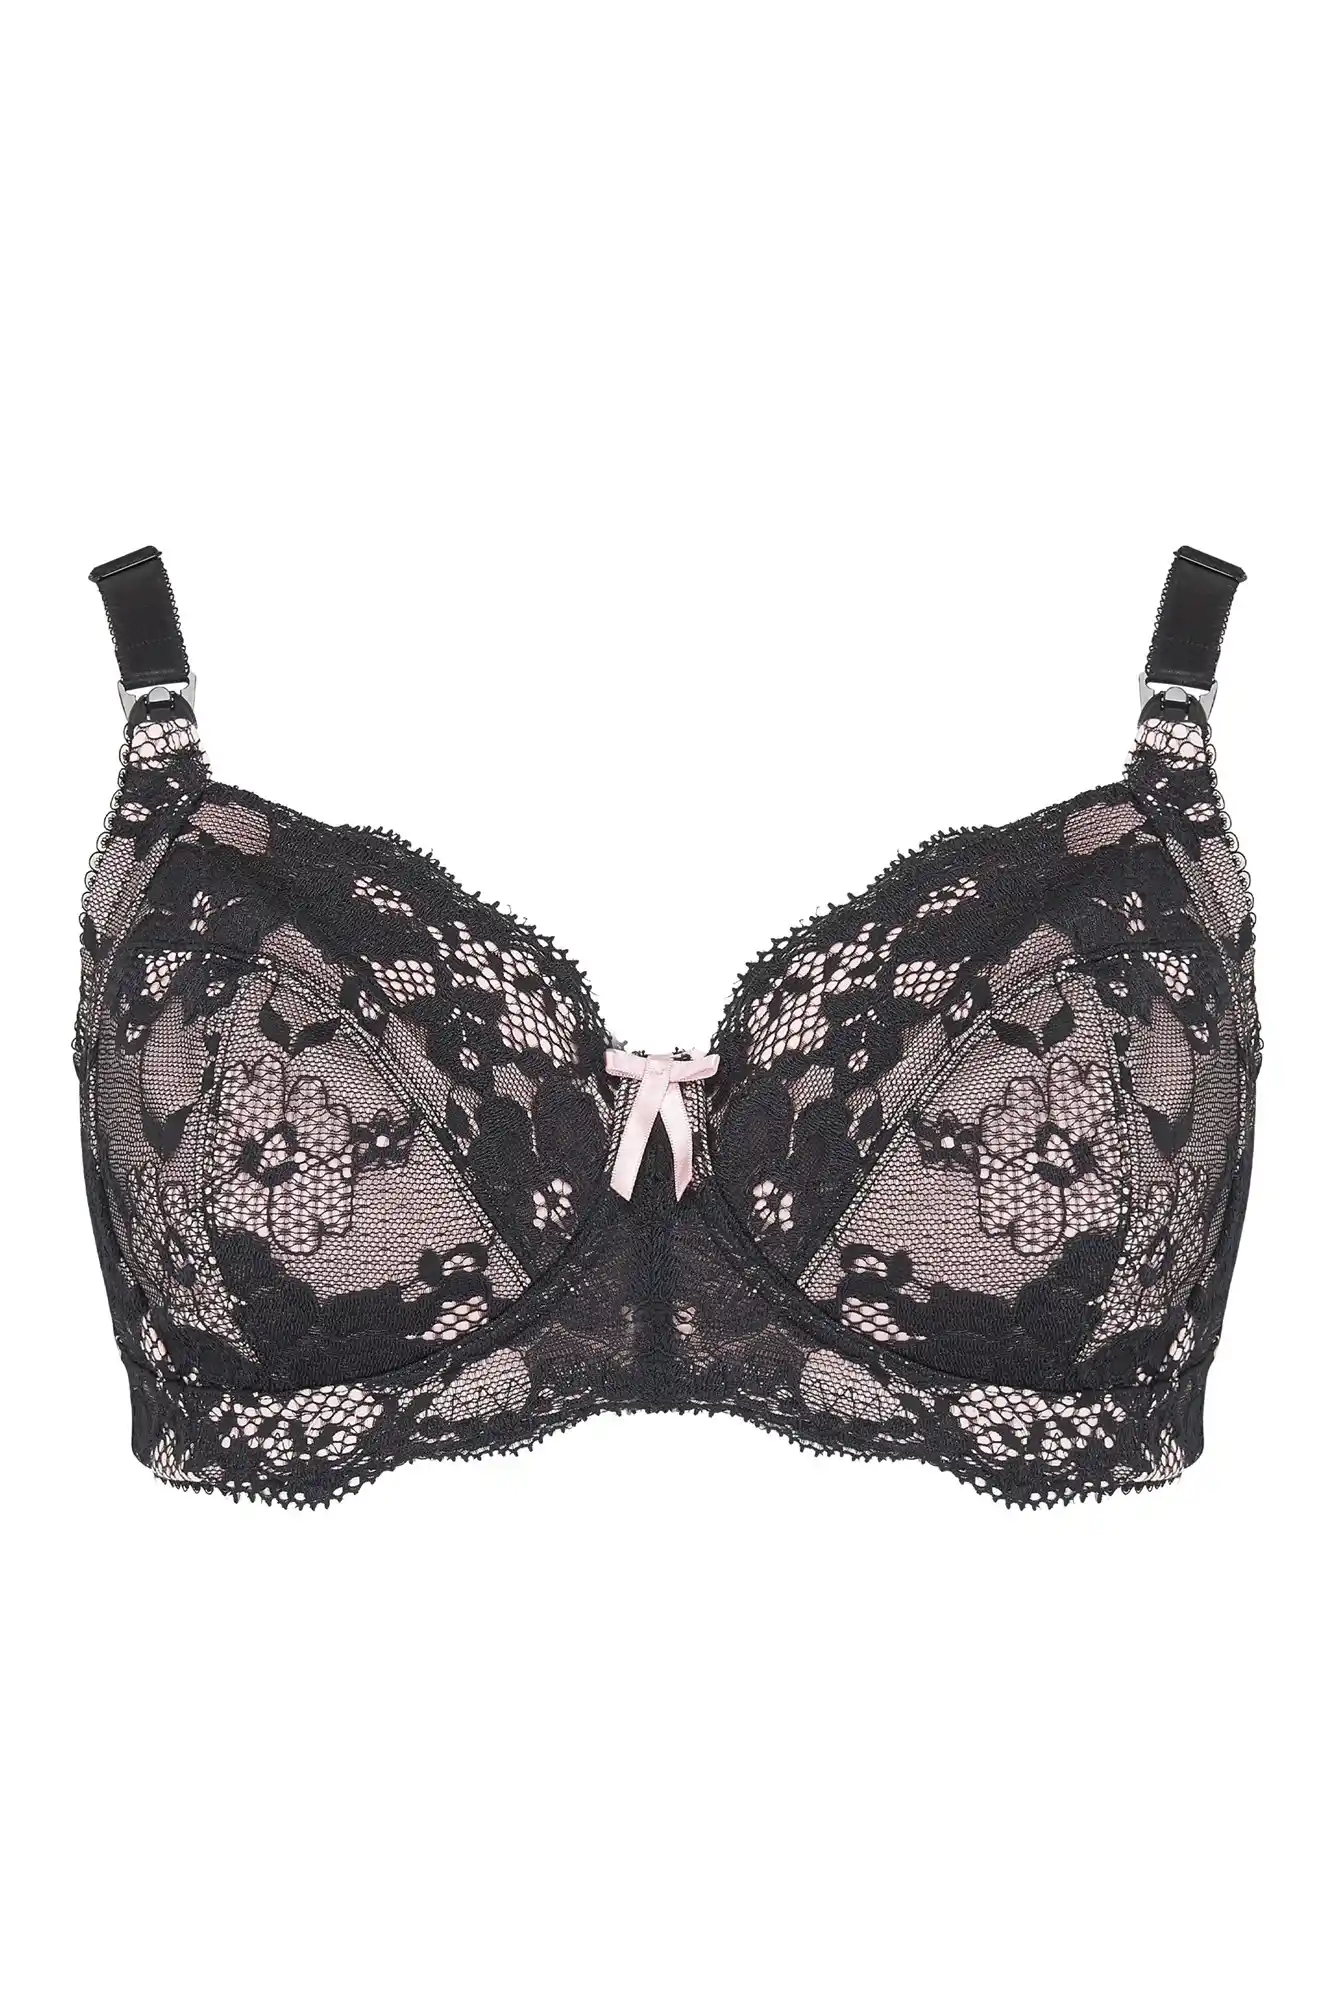 Midnight Magic Lingerie - Nursing bras are STILL all $10 off til the end of  March. If you're due soon, or know someone who is, it's a great time to get  fitted